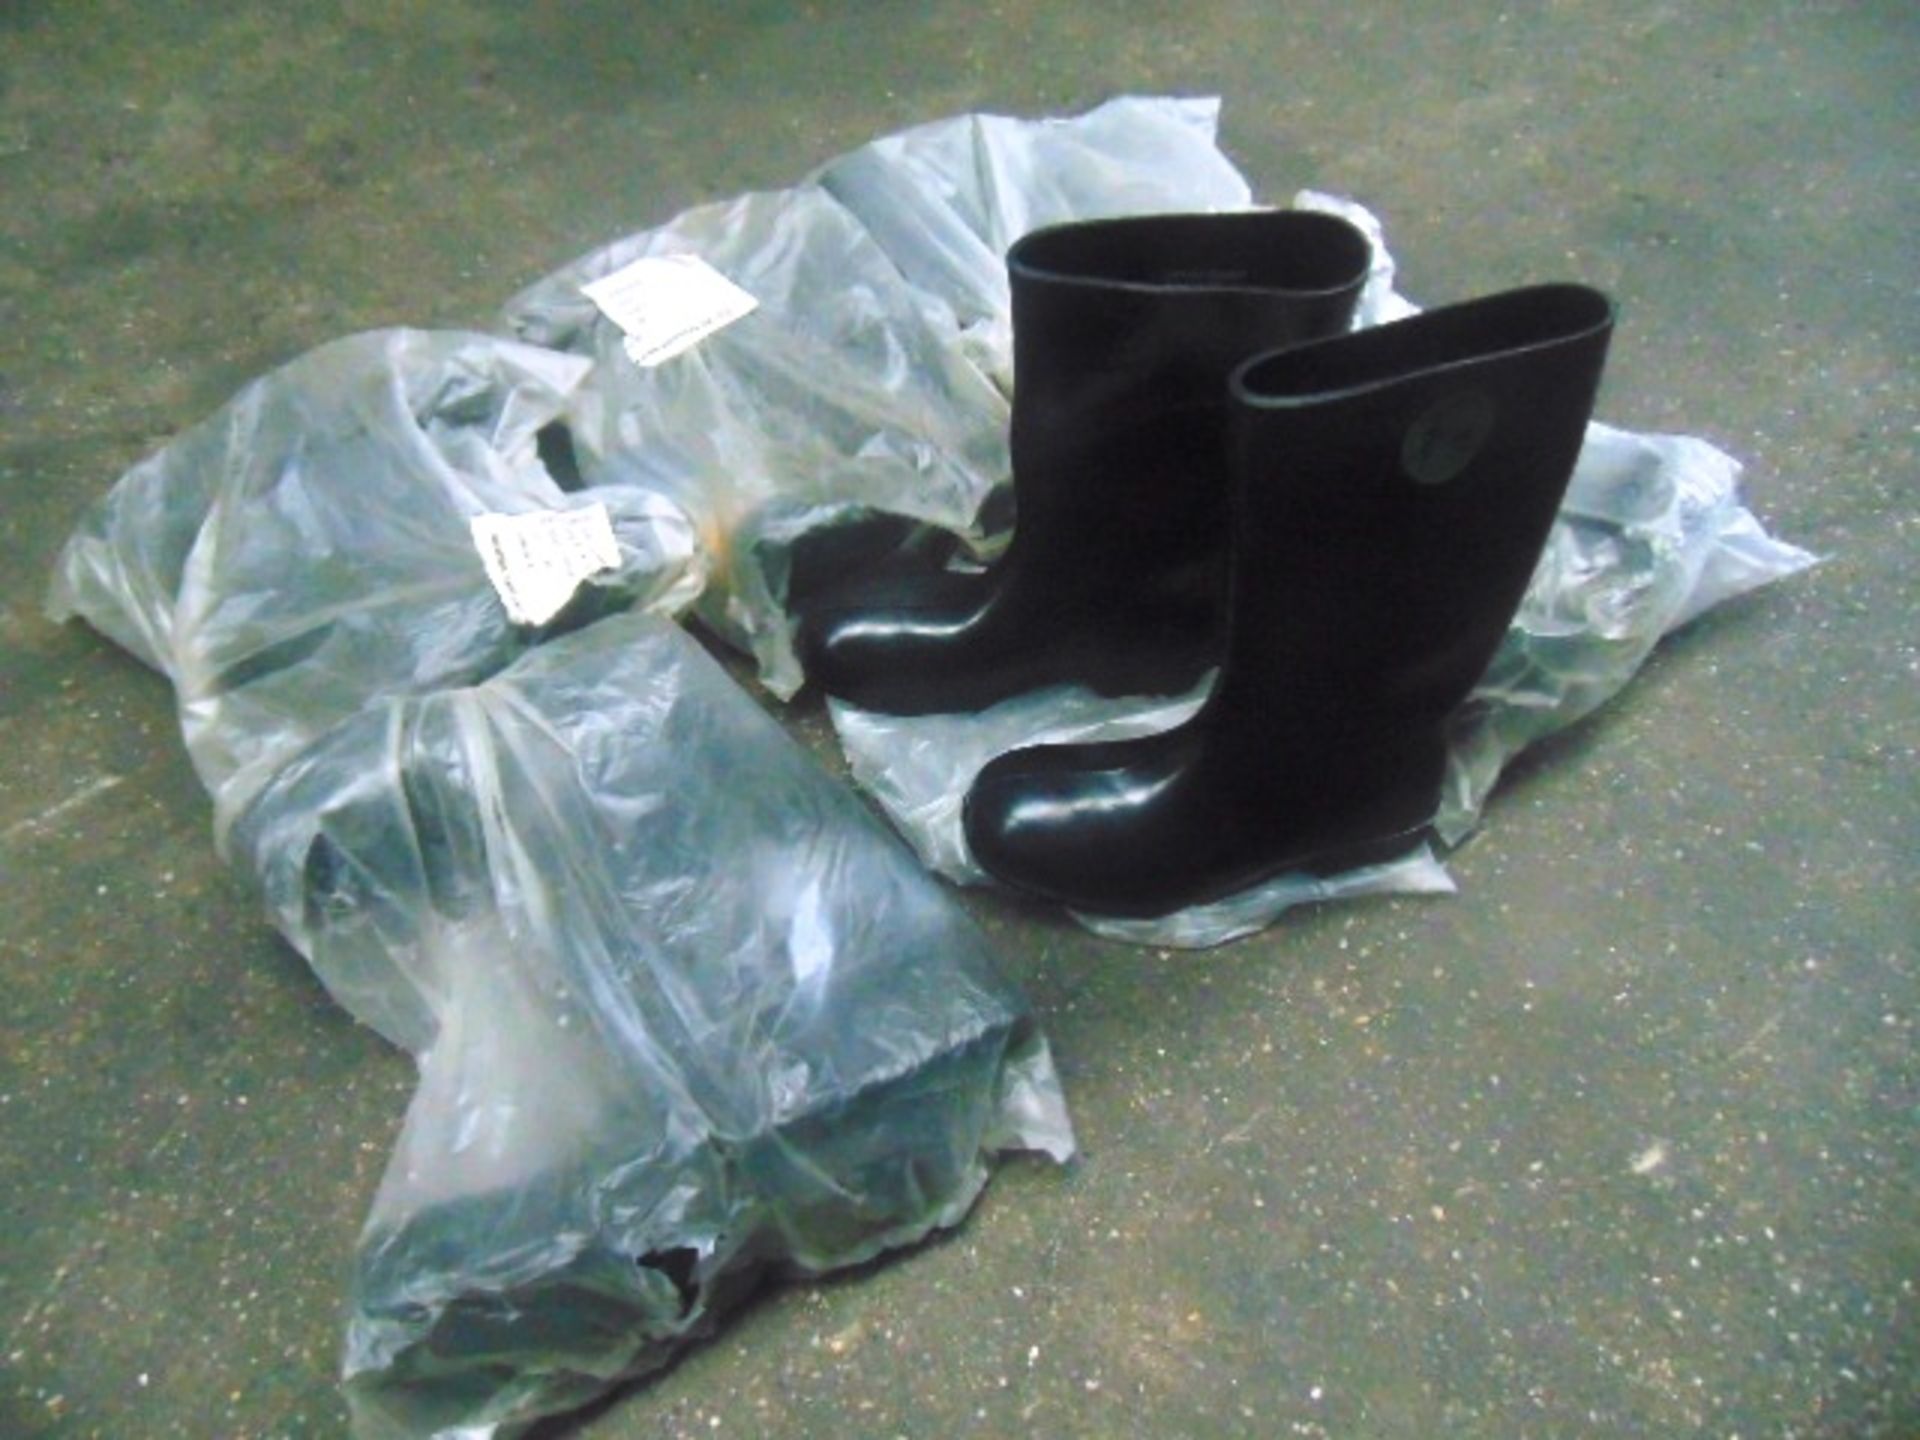 6 x Unissued Pairs of Bekina L400/88 Rubber Safety Boots wit Non Metallic Toe Cap and Mid Sole